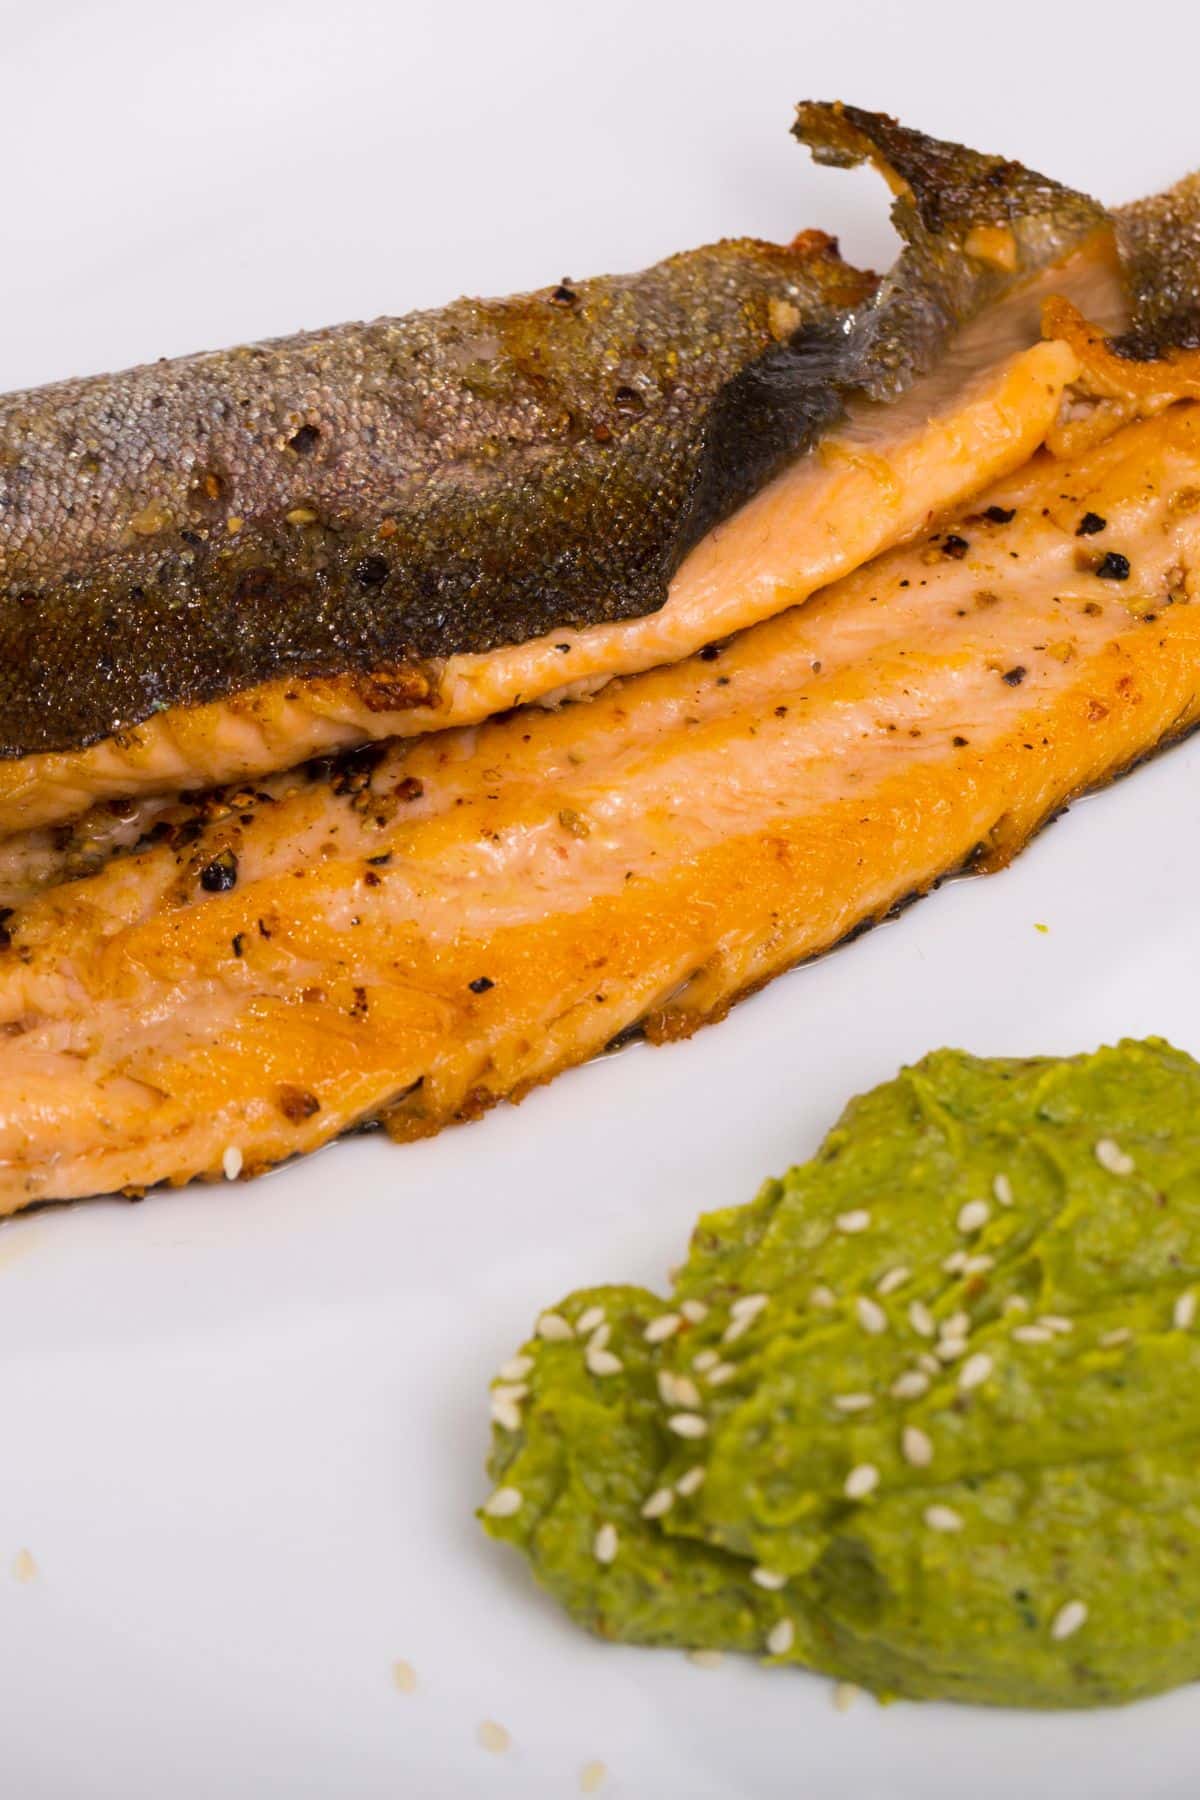 two pieces of grilled trout with broccoli puree.